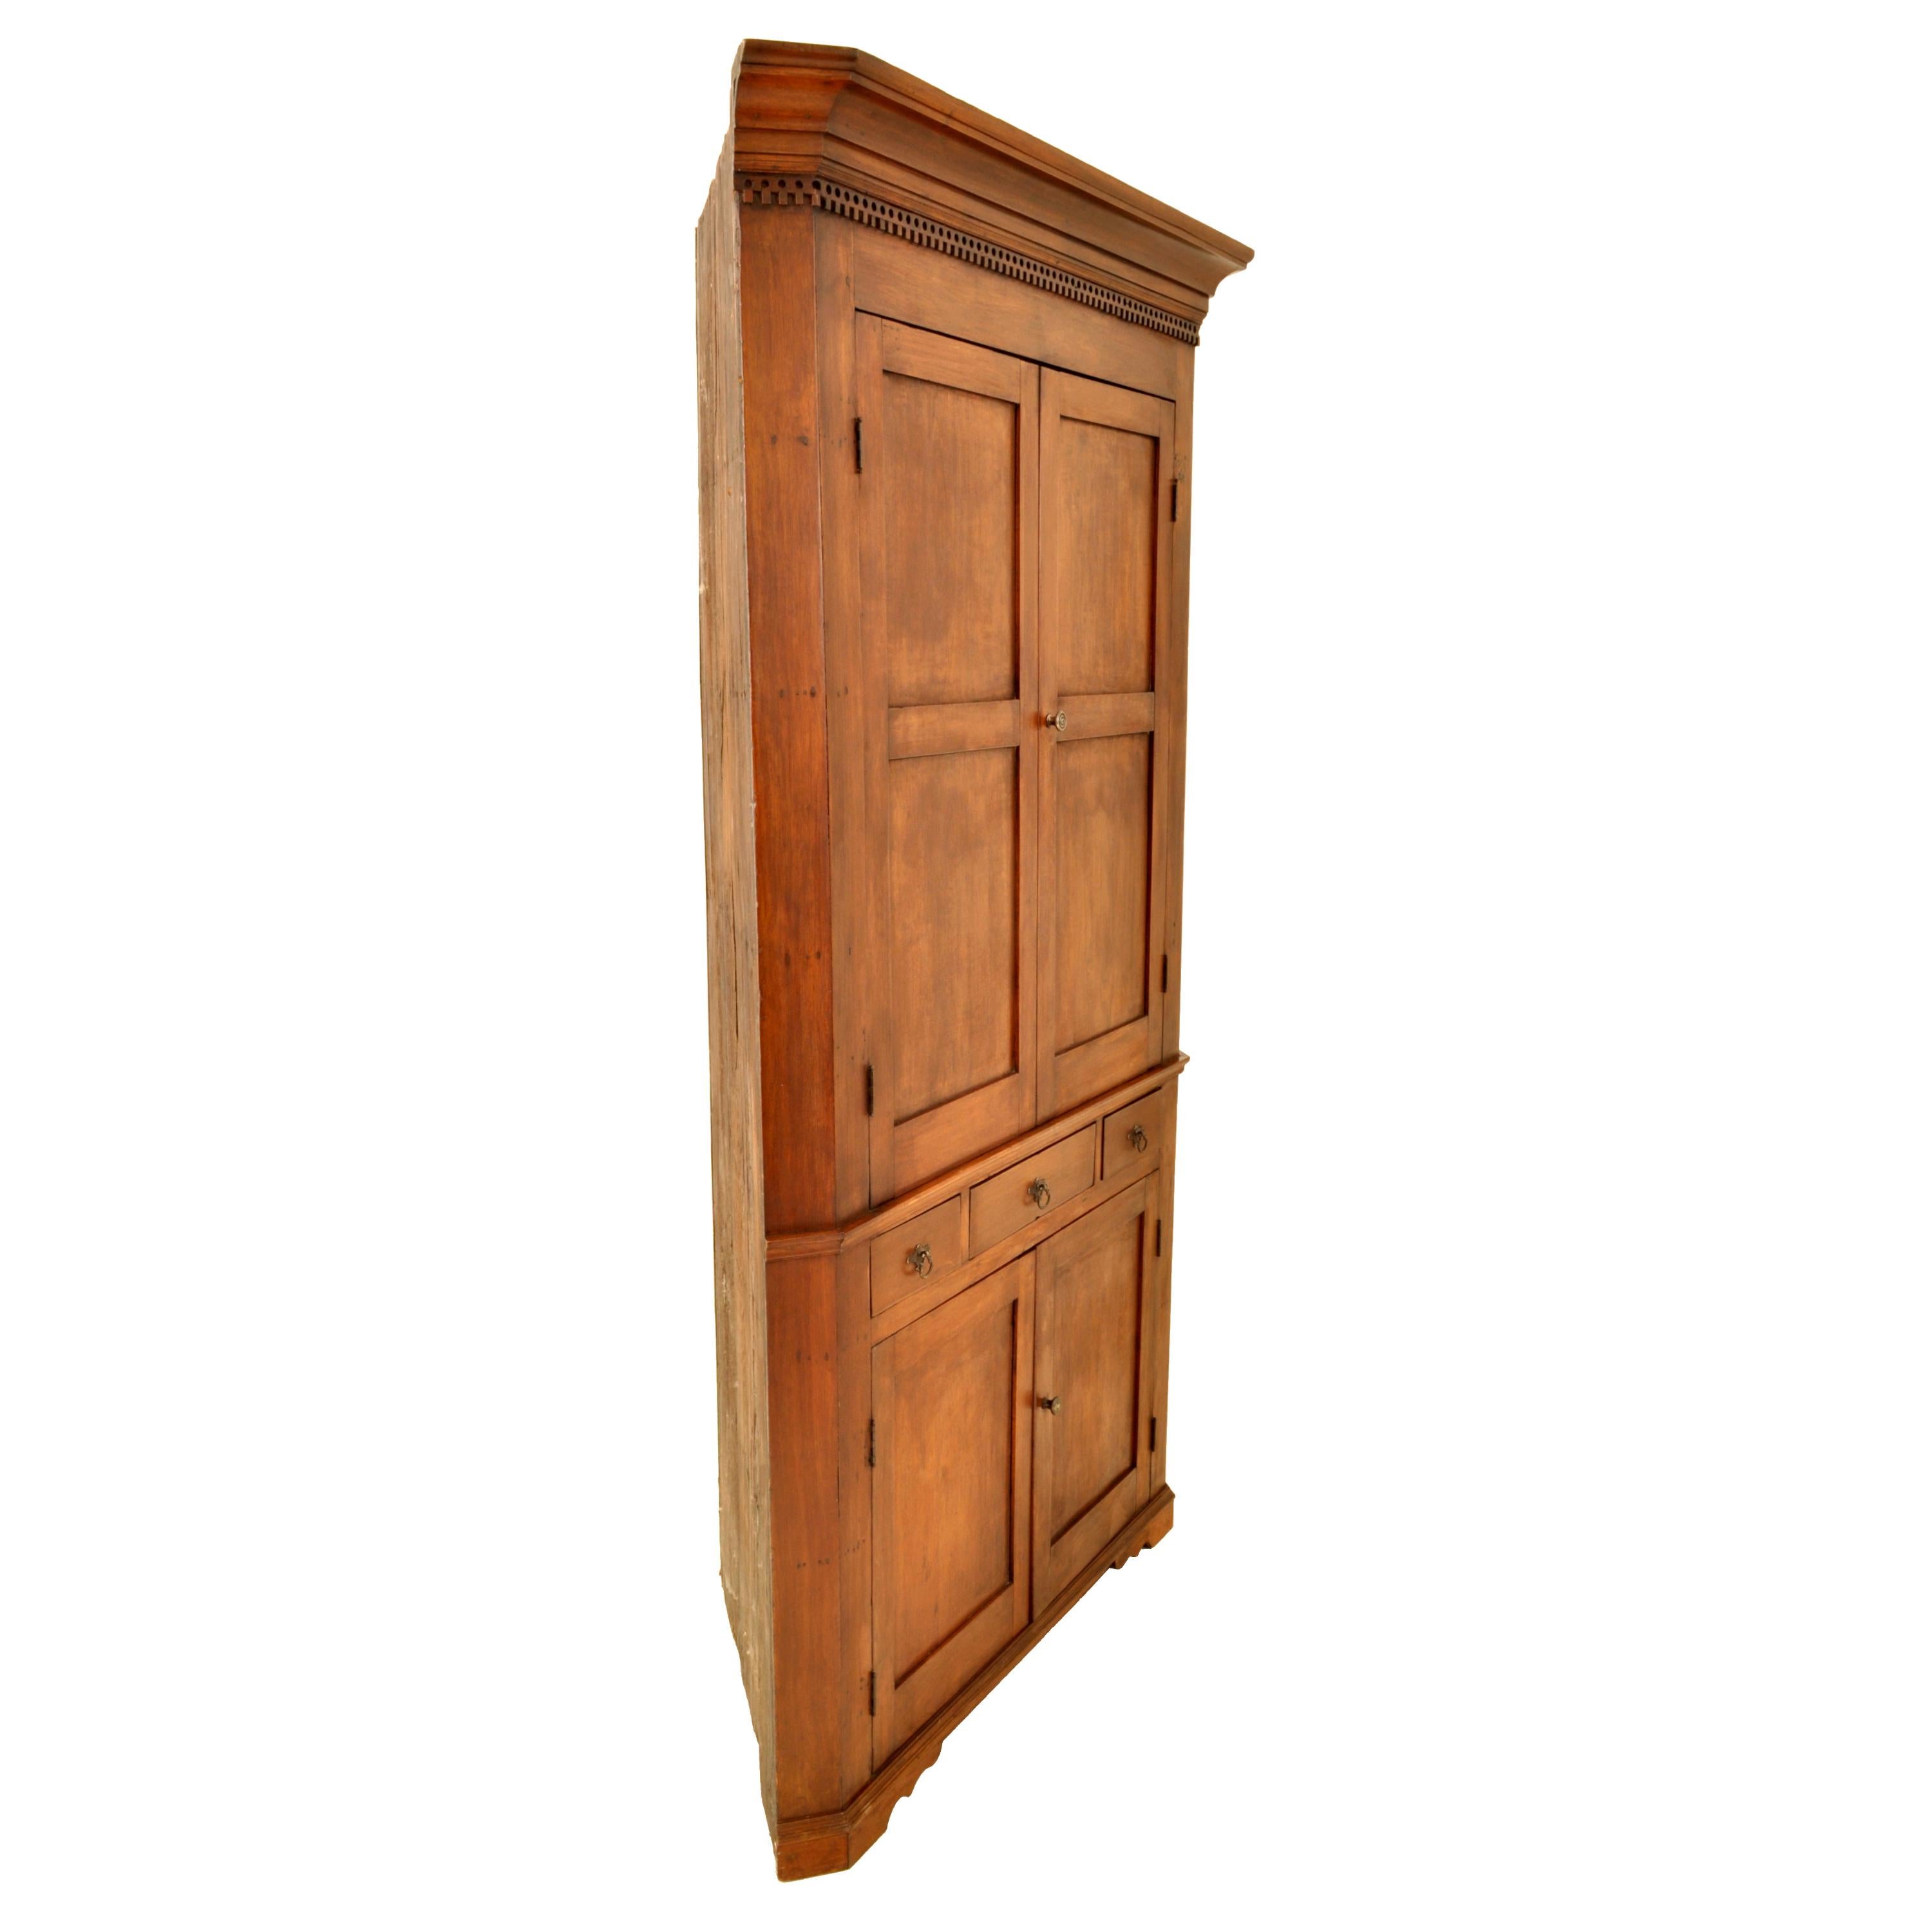 Antique American Colonial cherry corner cabinet, Pennsylvania, circa 1830.
The cabinet having a stepped cornice with dentil molding below, the top part of the cabinet having twin paneled doors, enclosing three shelves, the doors having traces of the